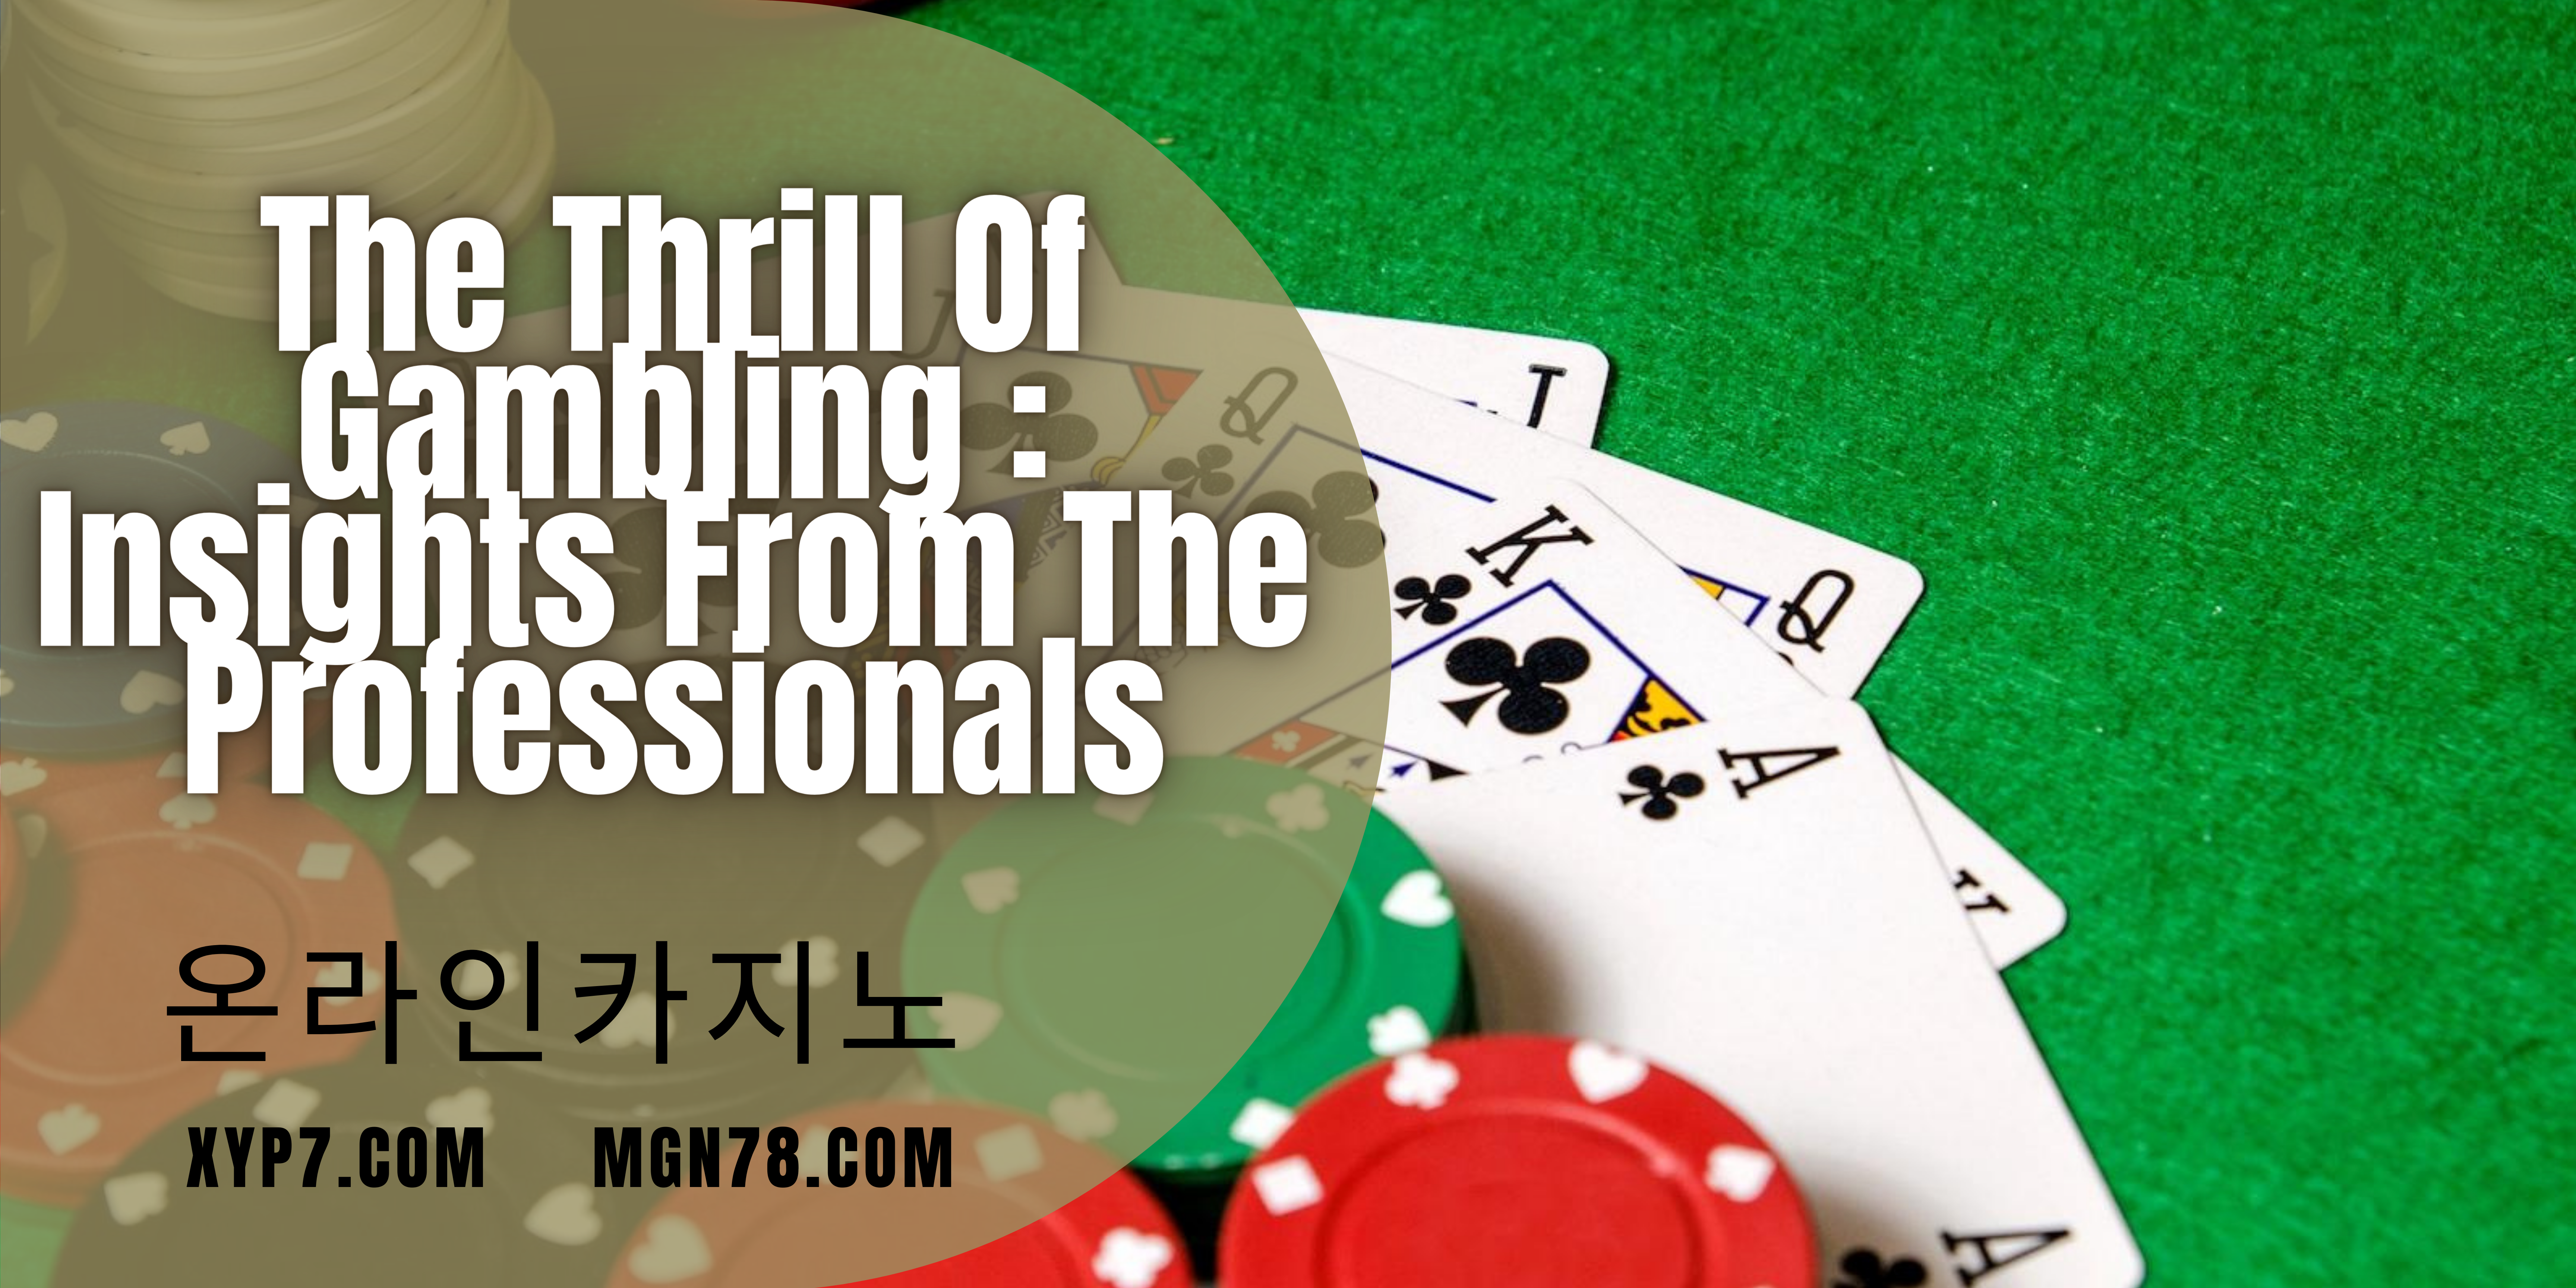 The Thrill Of Gambling : Insights From The Professionals